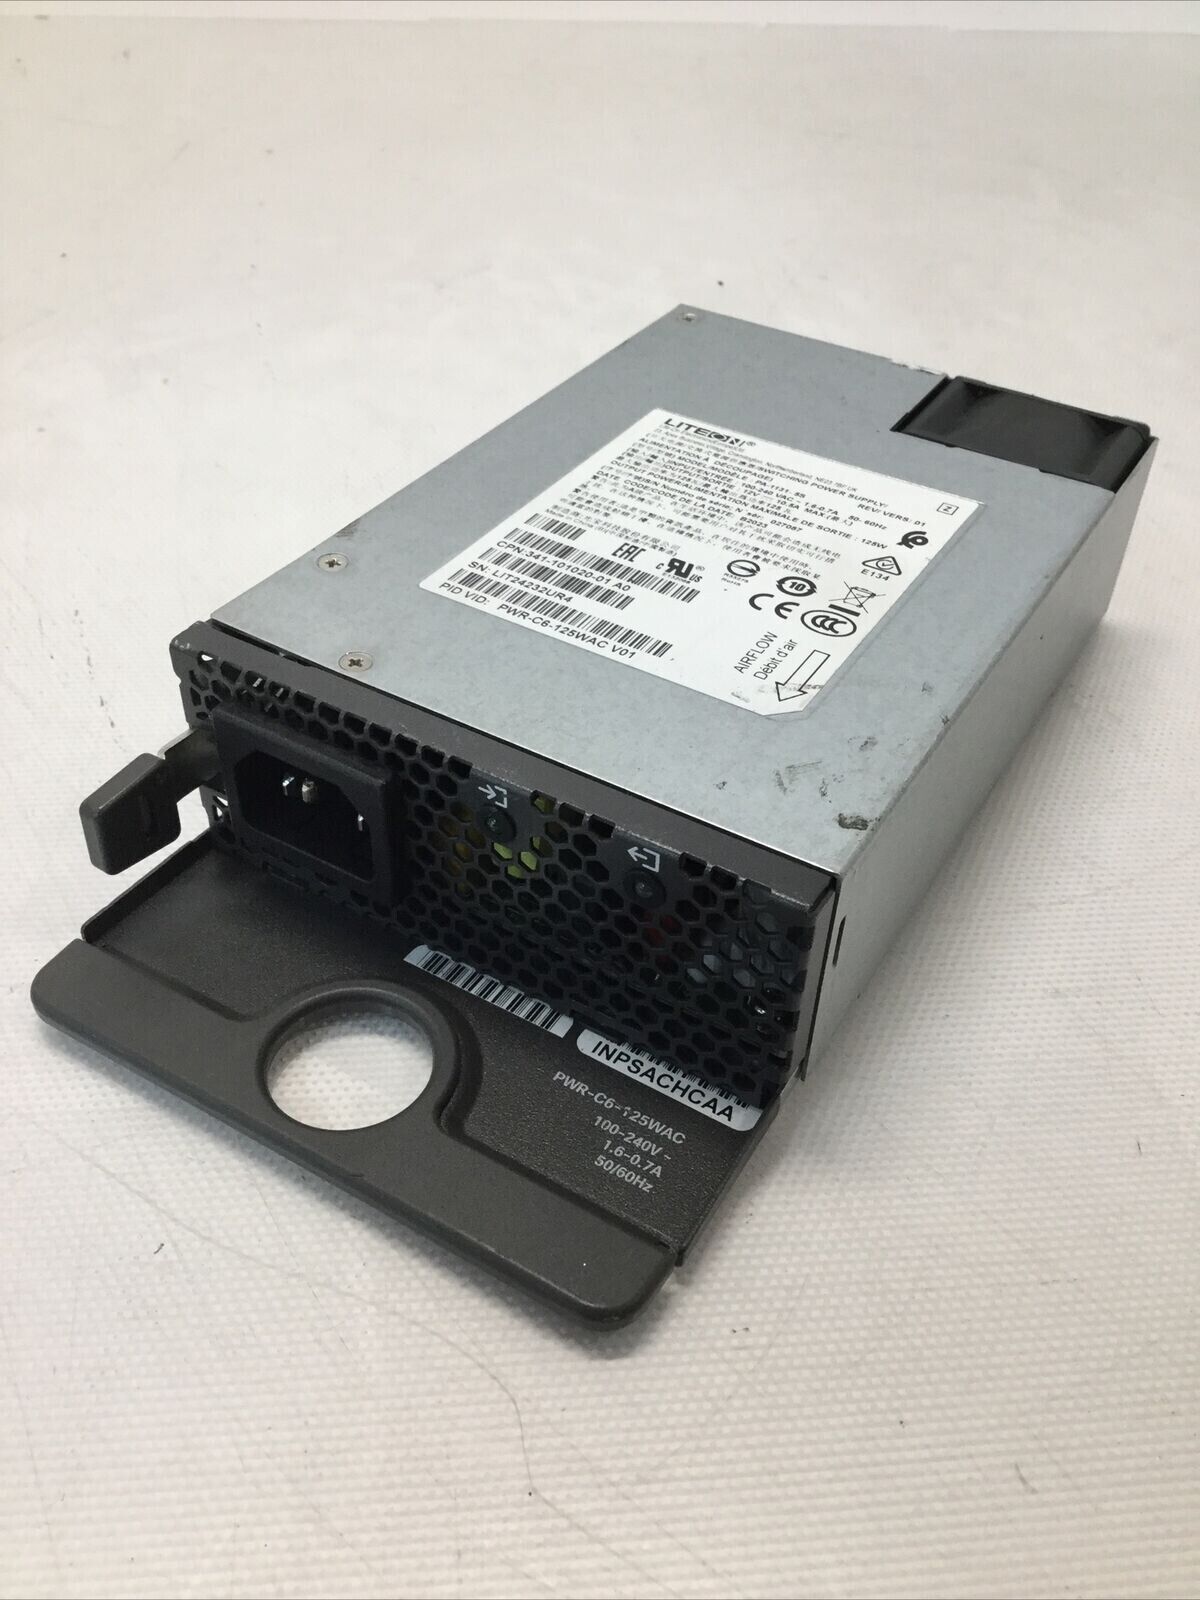 Cisco PWR-C6-125WAC 125W AC Power Supply for Catalyst 9200 Series Switches